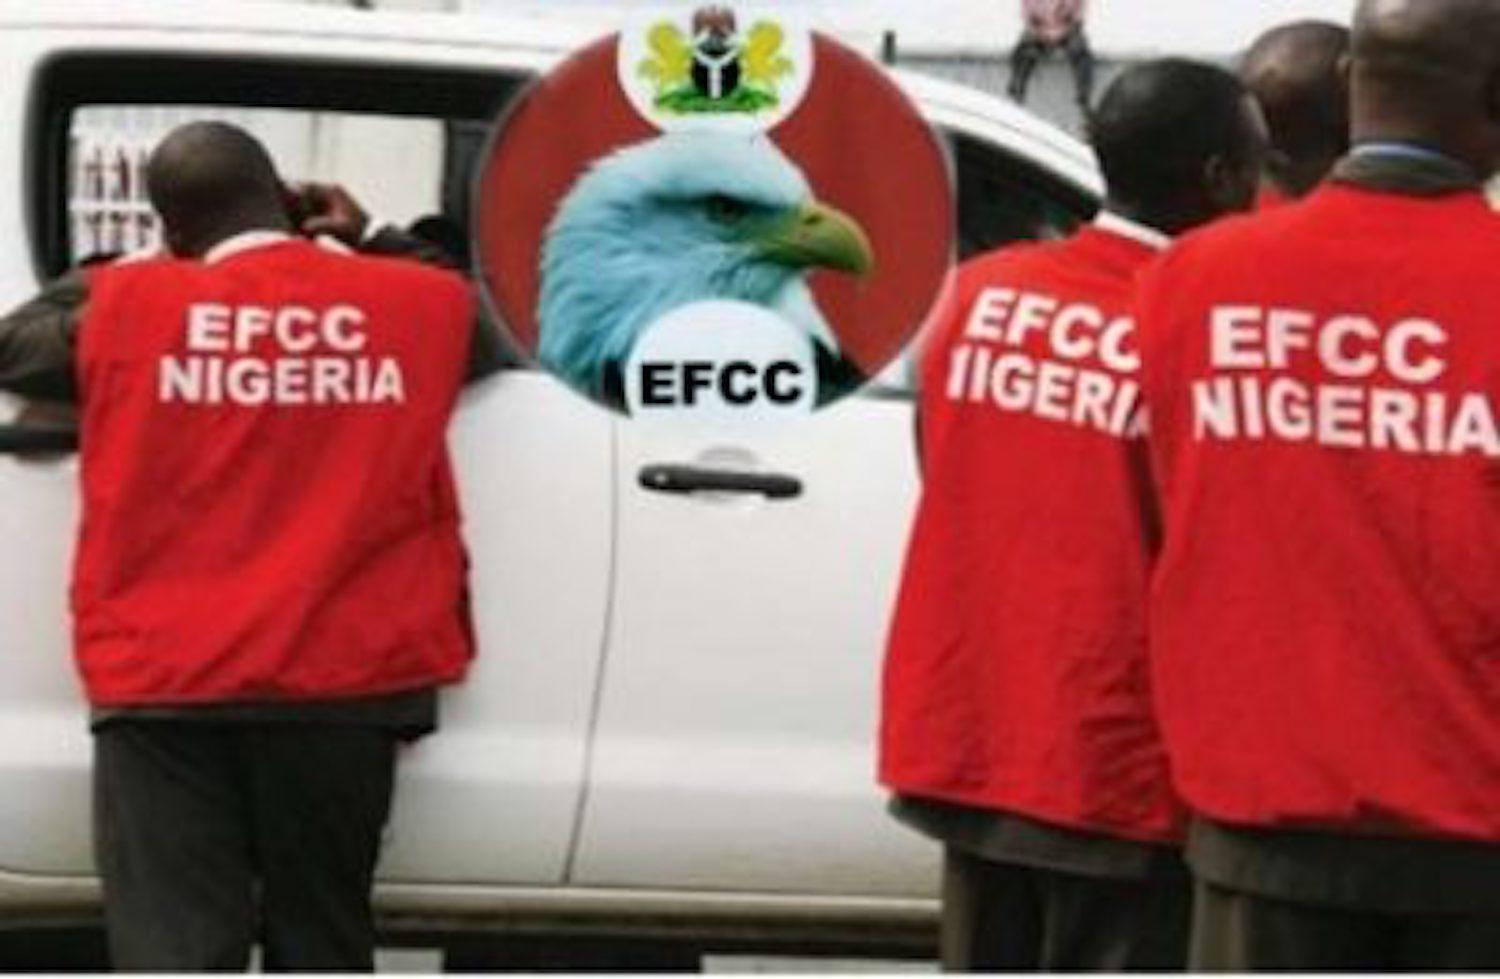 EFCC allegedly breaks into house